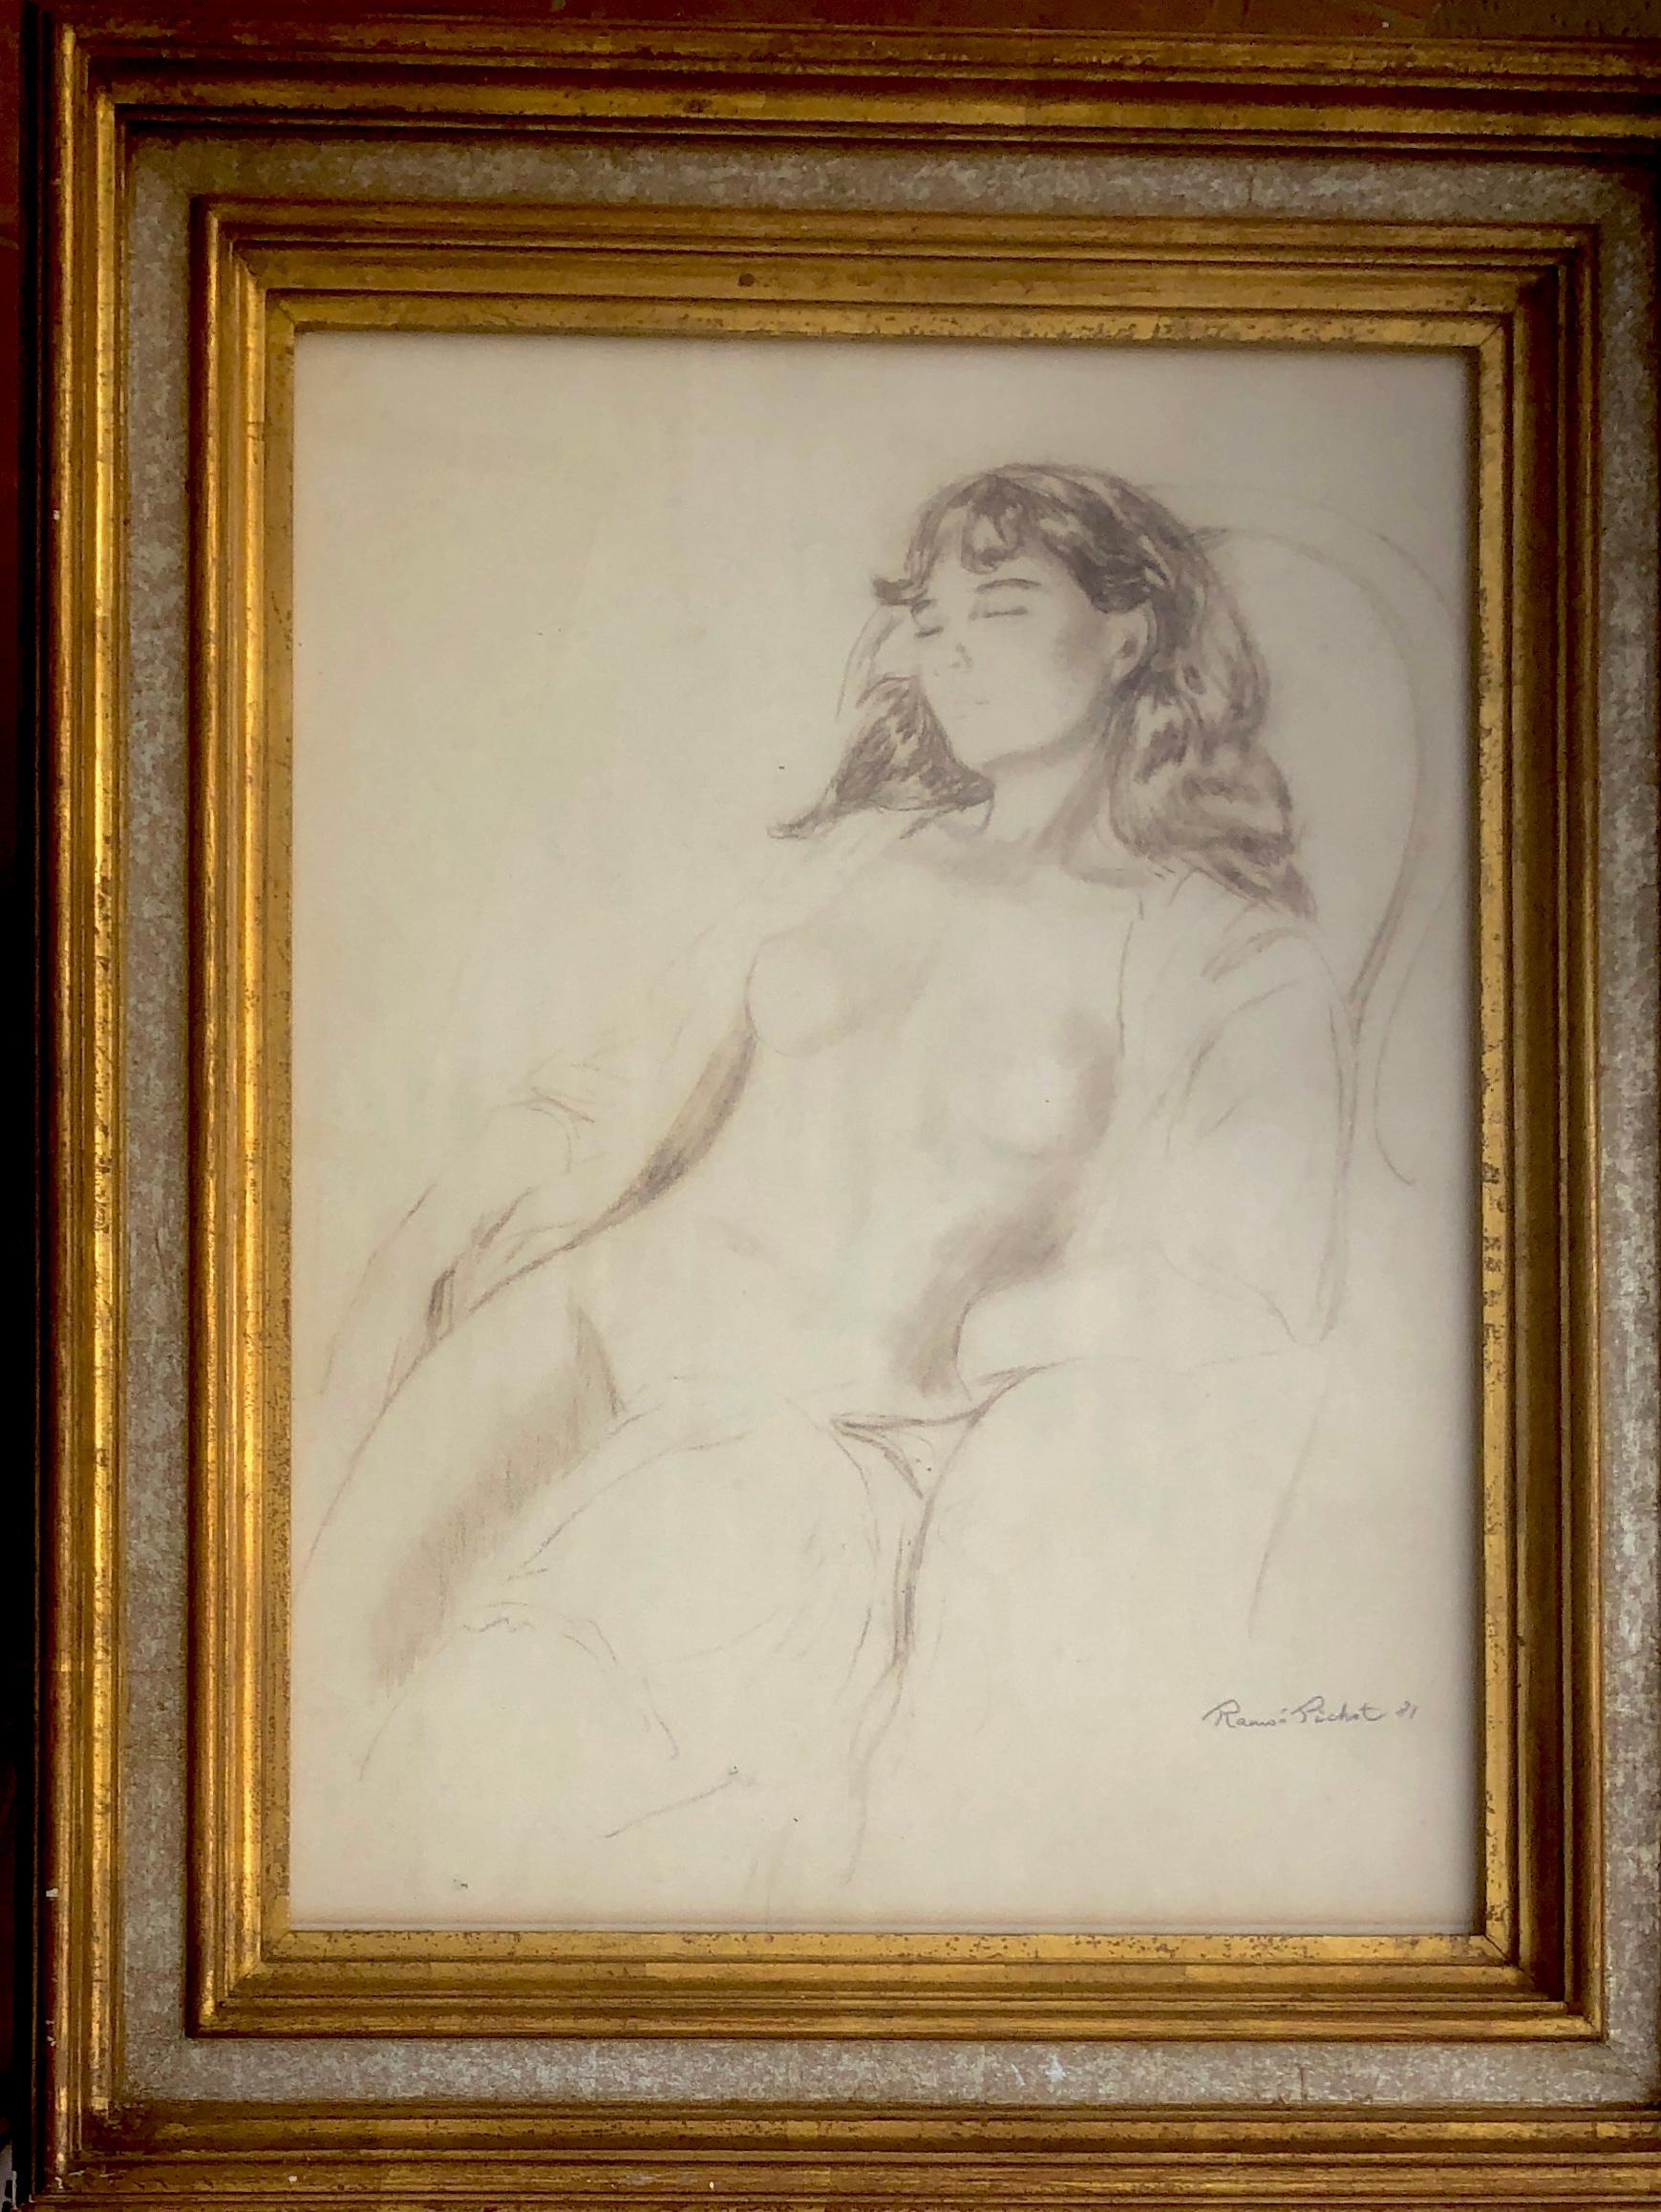 Nude woman pencil drawing Ramón Pichot - Painting by Ramon Pichot i Soler